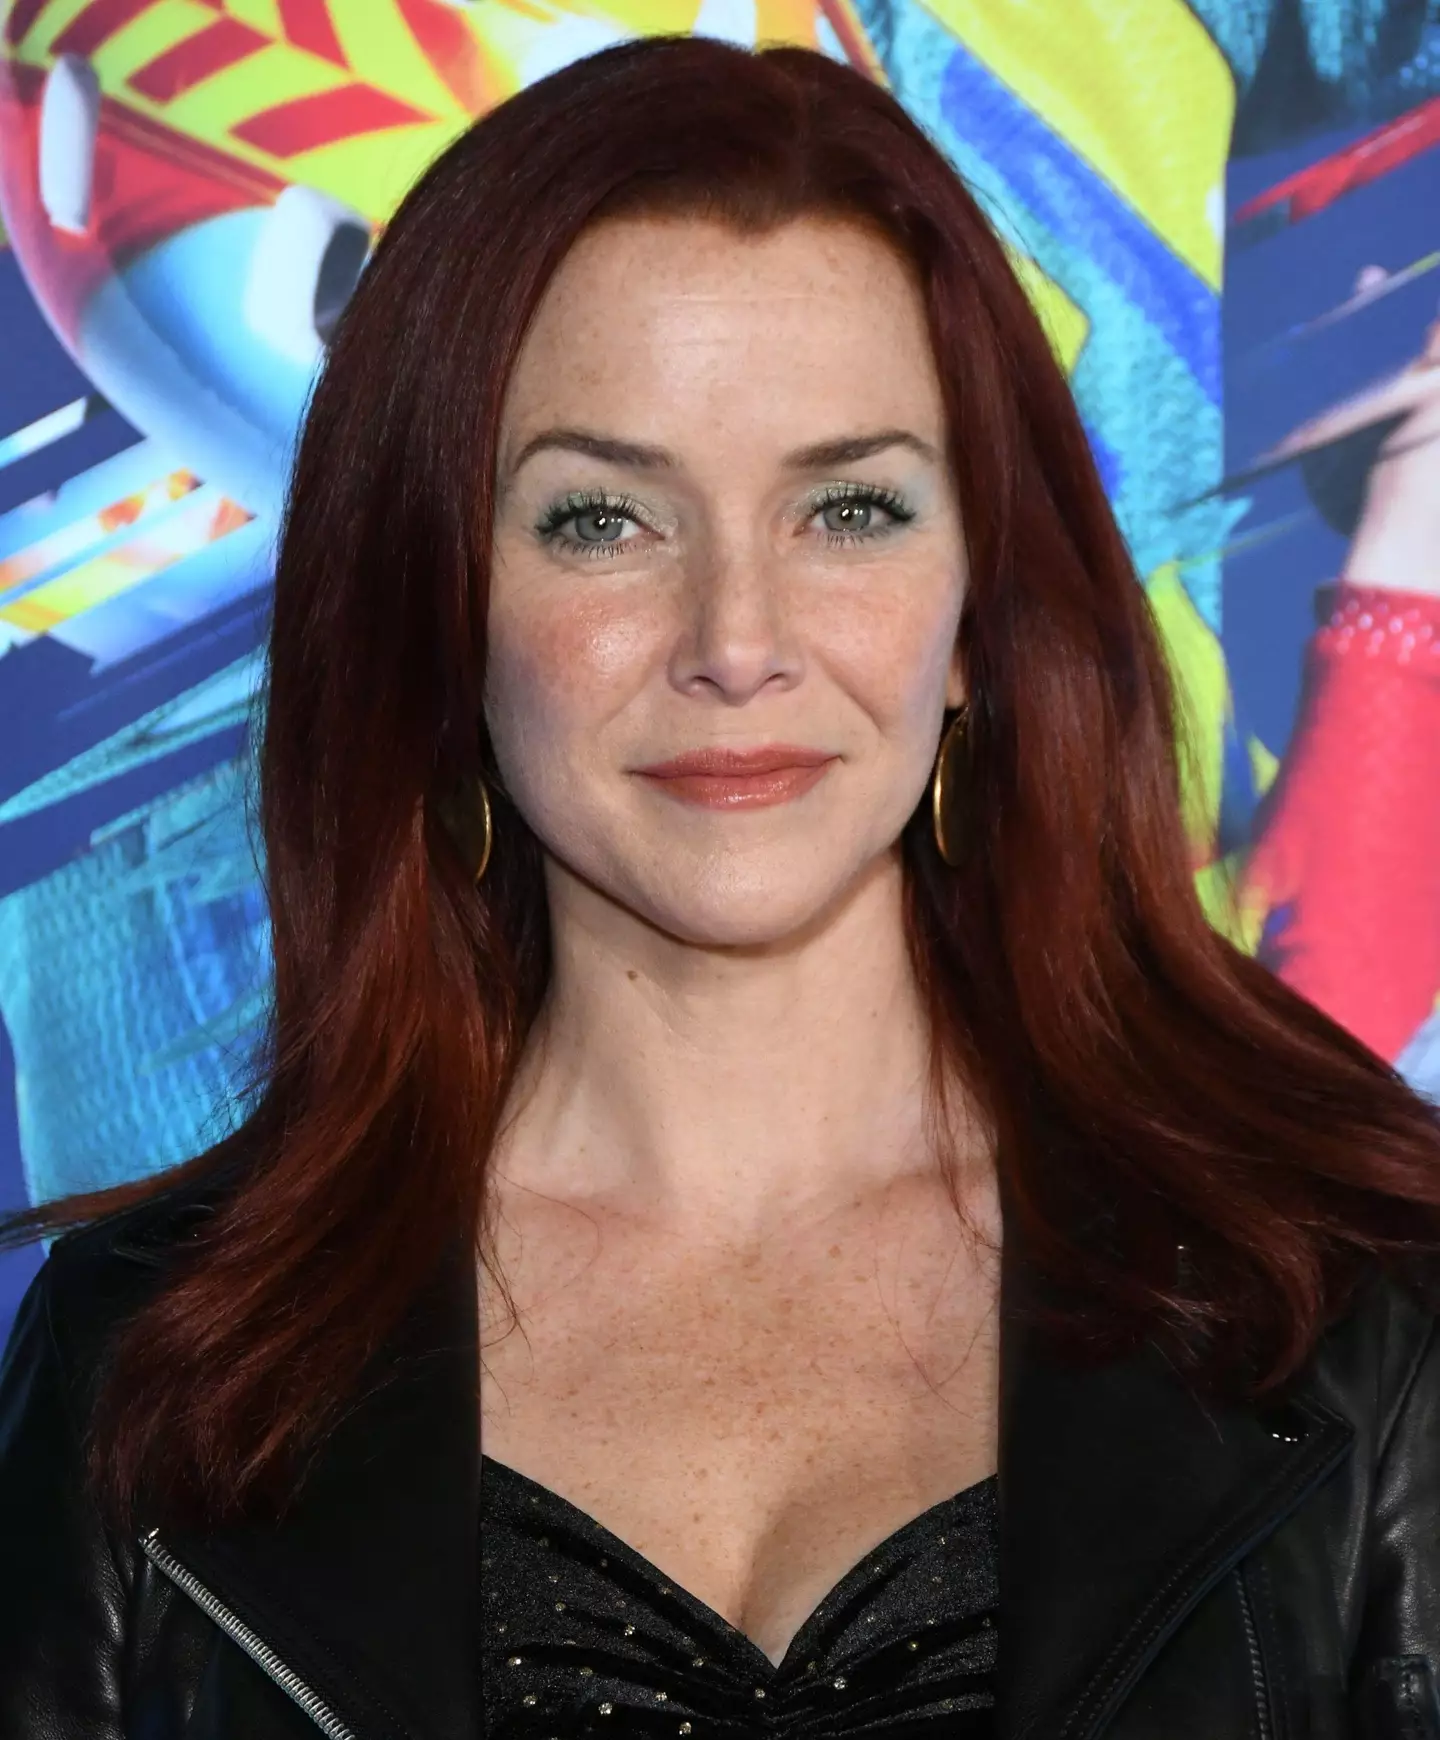 Annie Wersching has passed away at the age of 45.